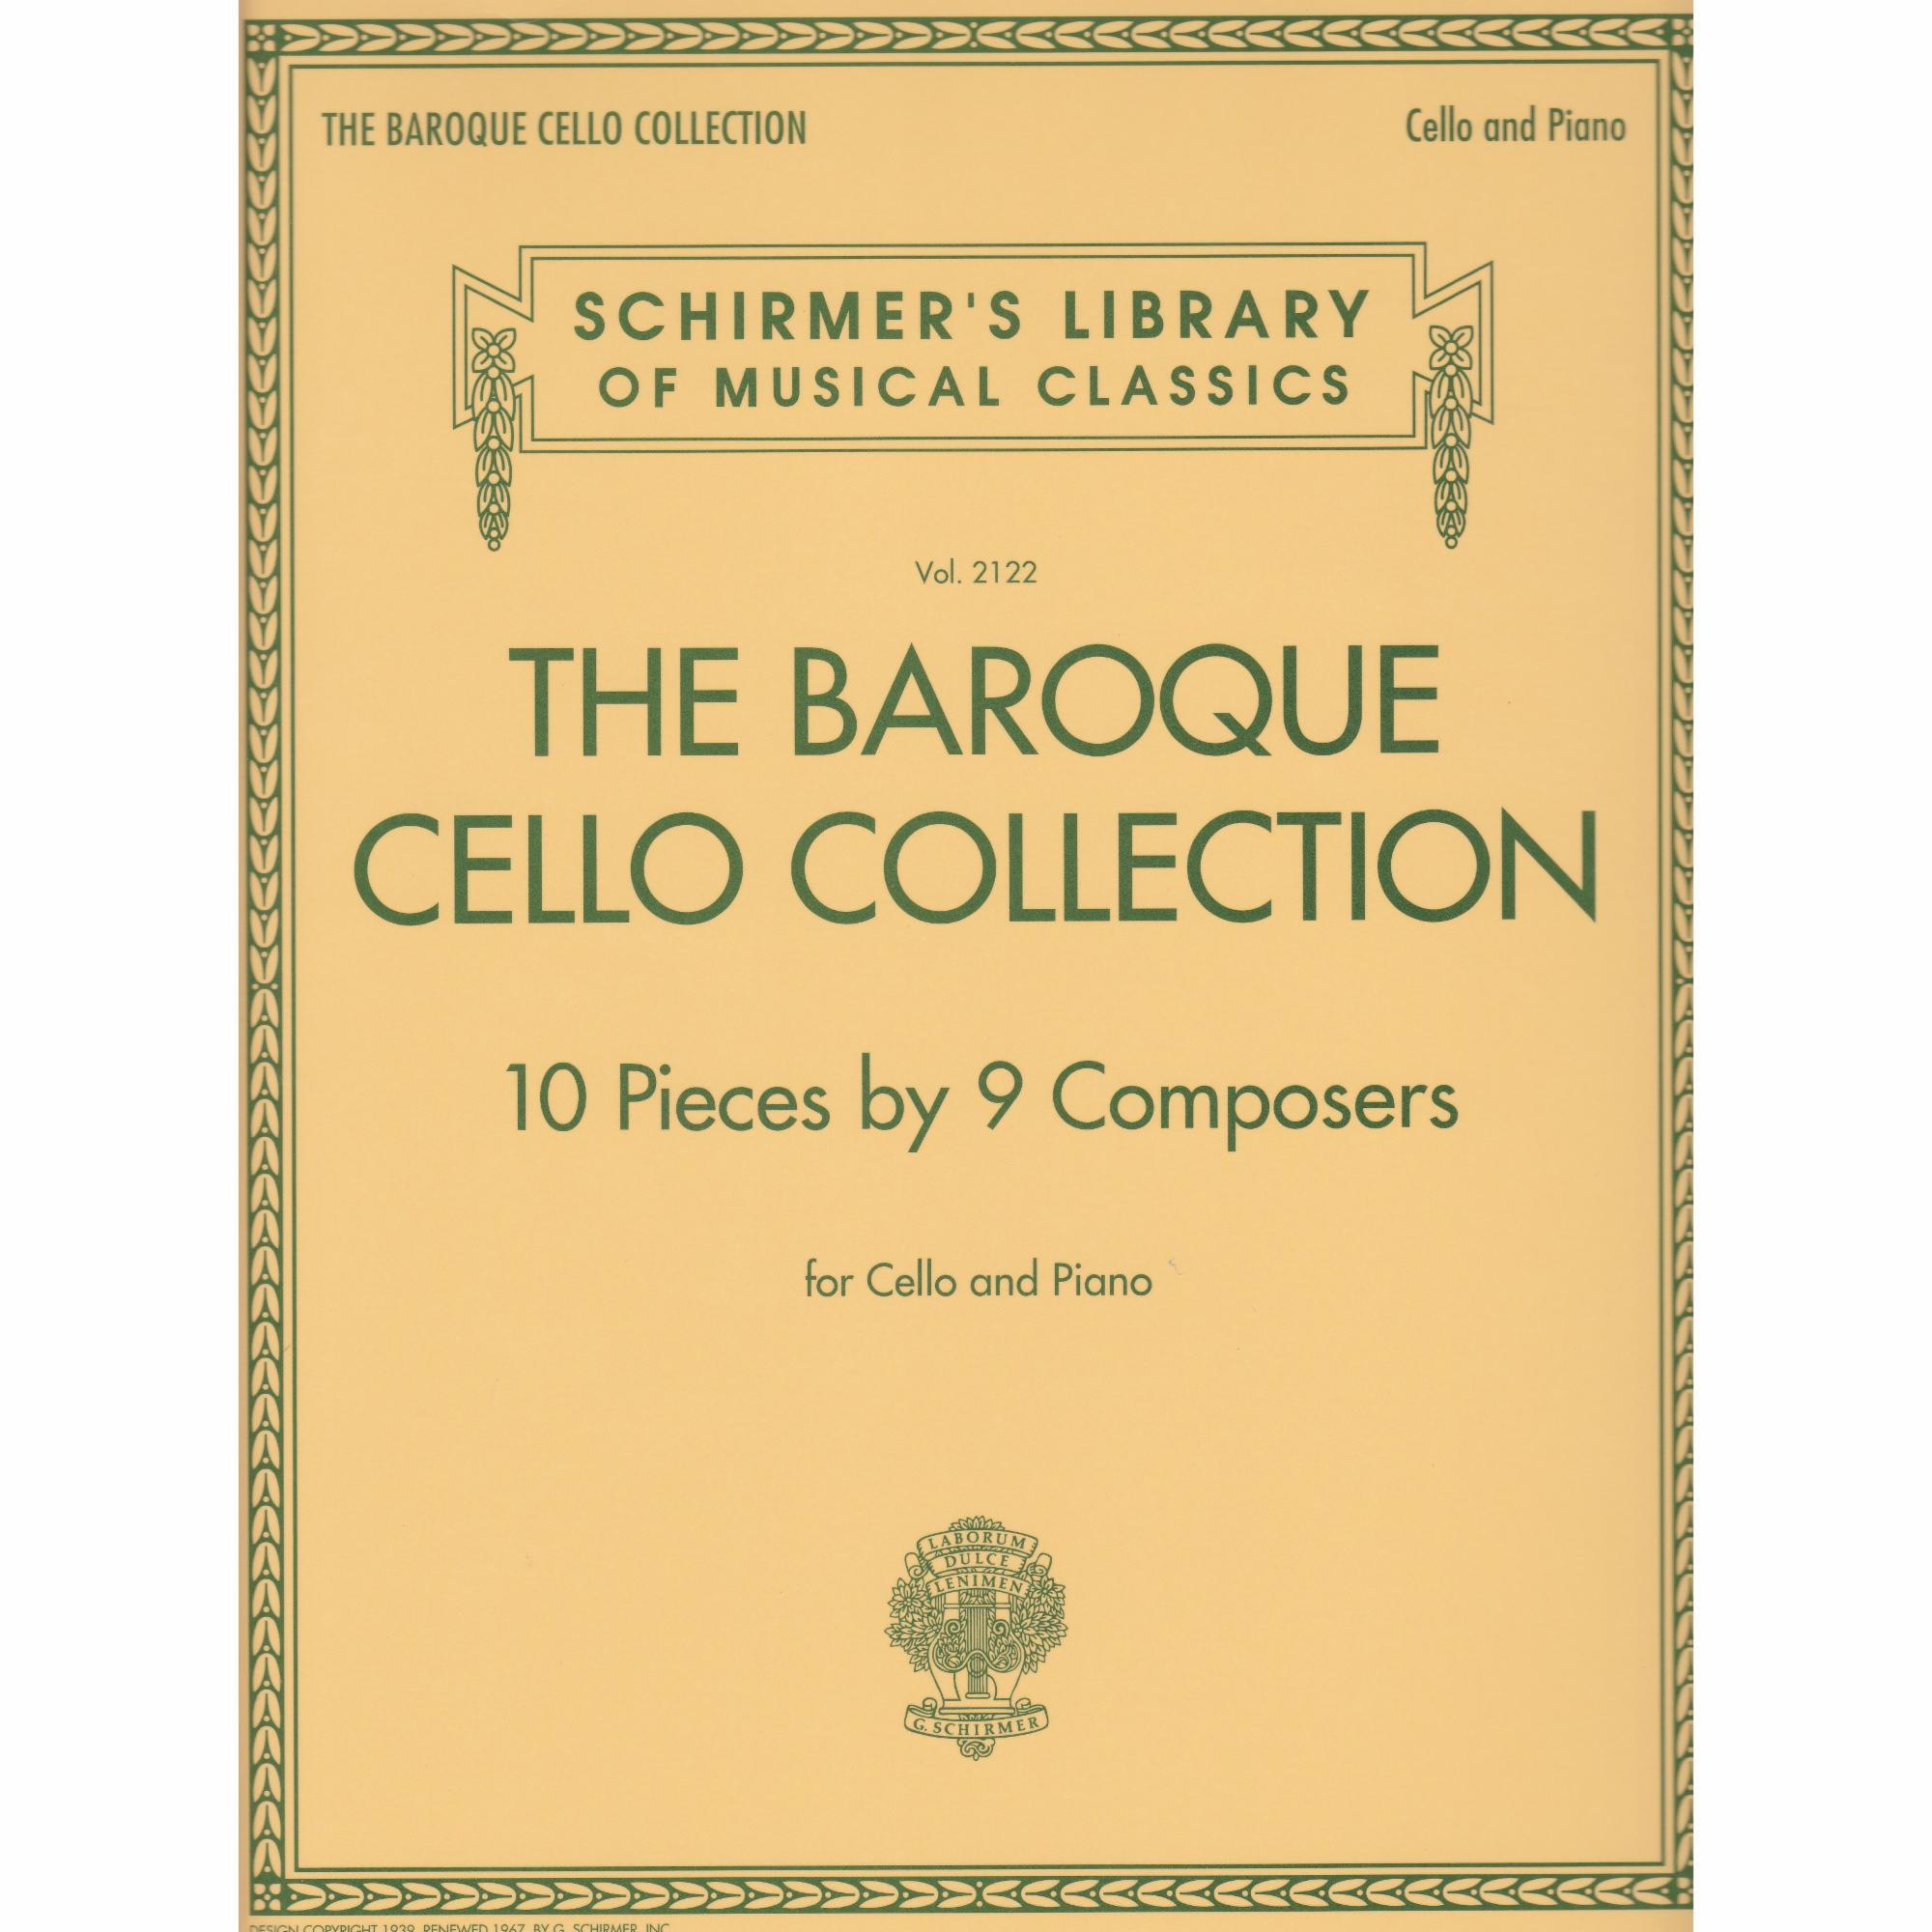 The Baroque Collection, 10 pcs for Cello and Piano